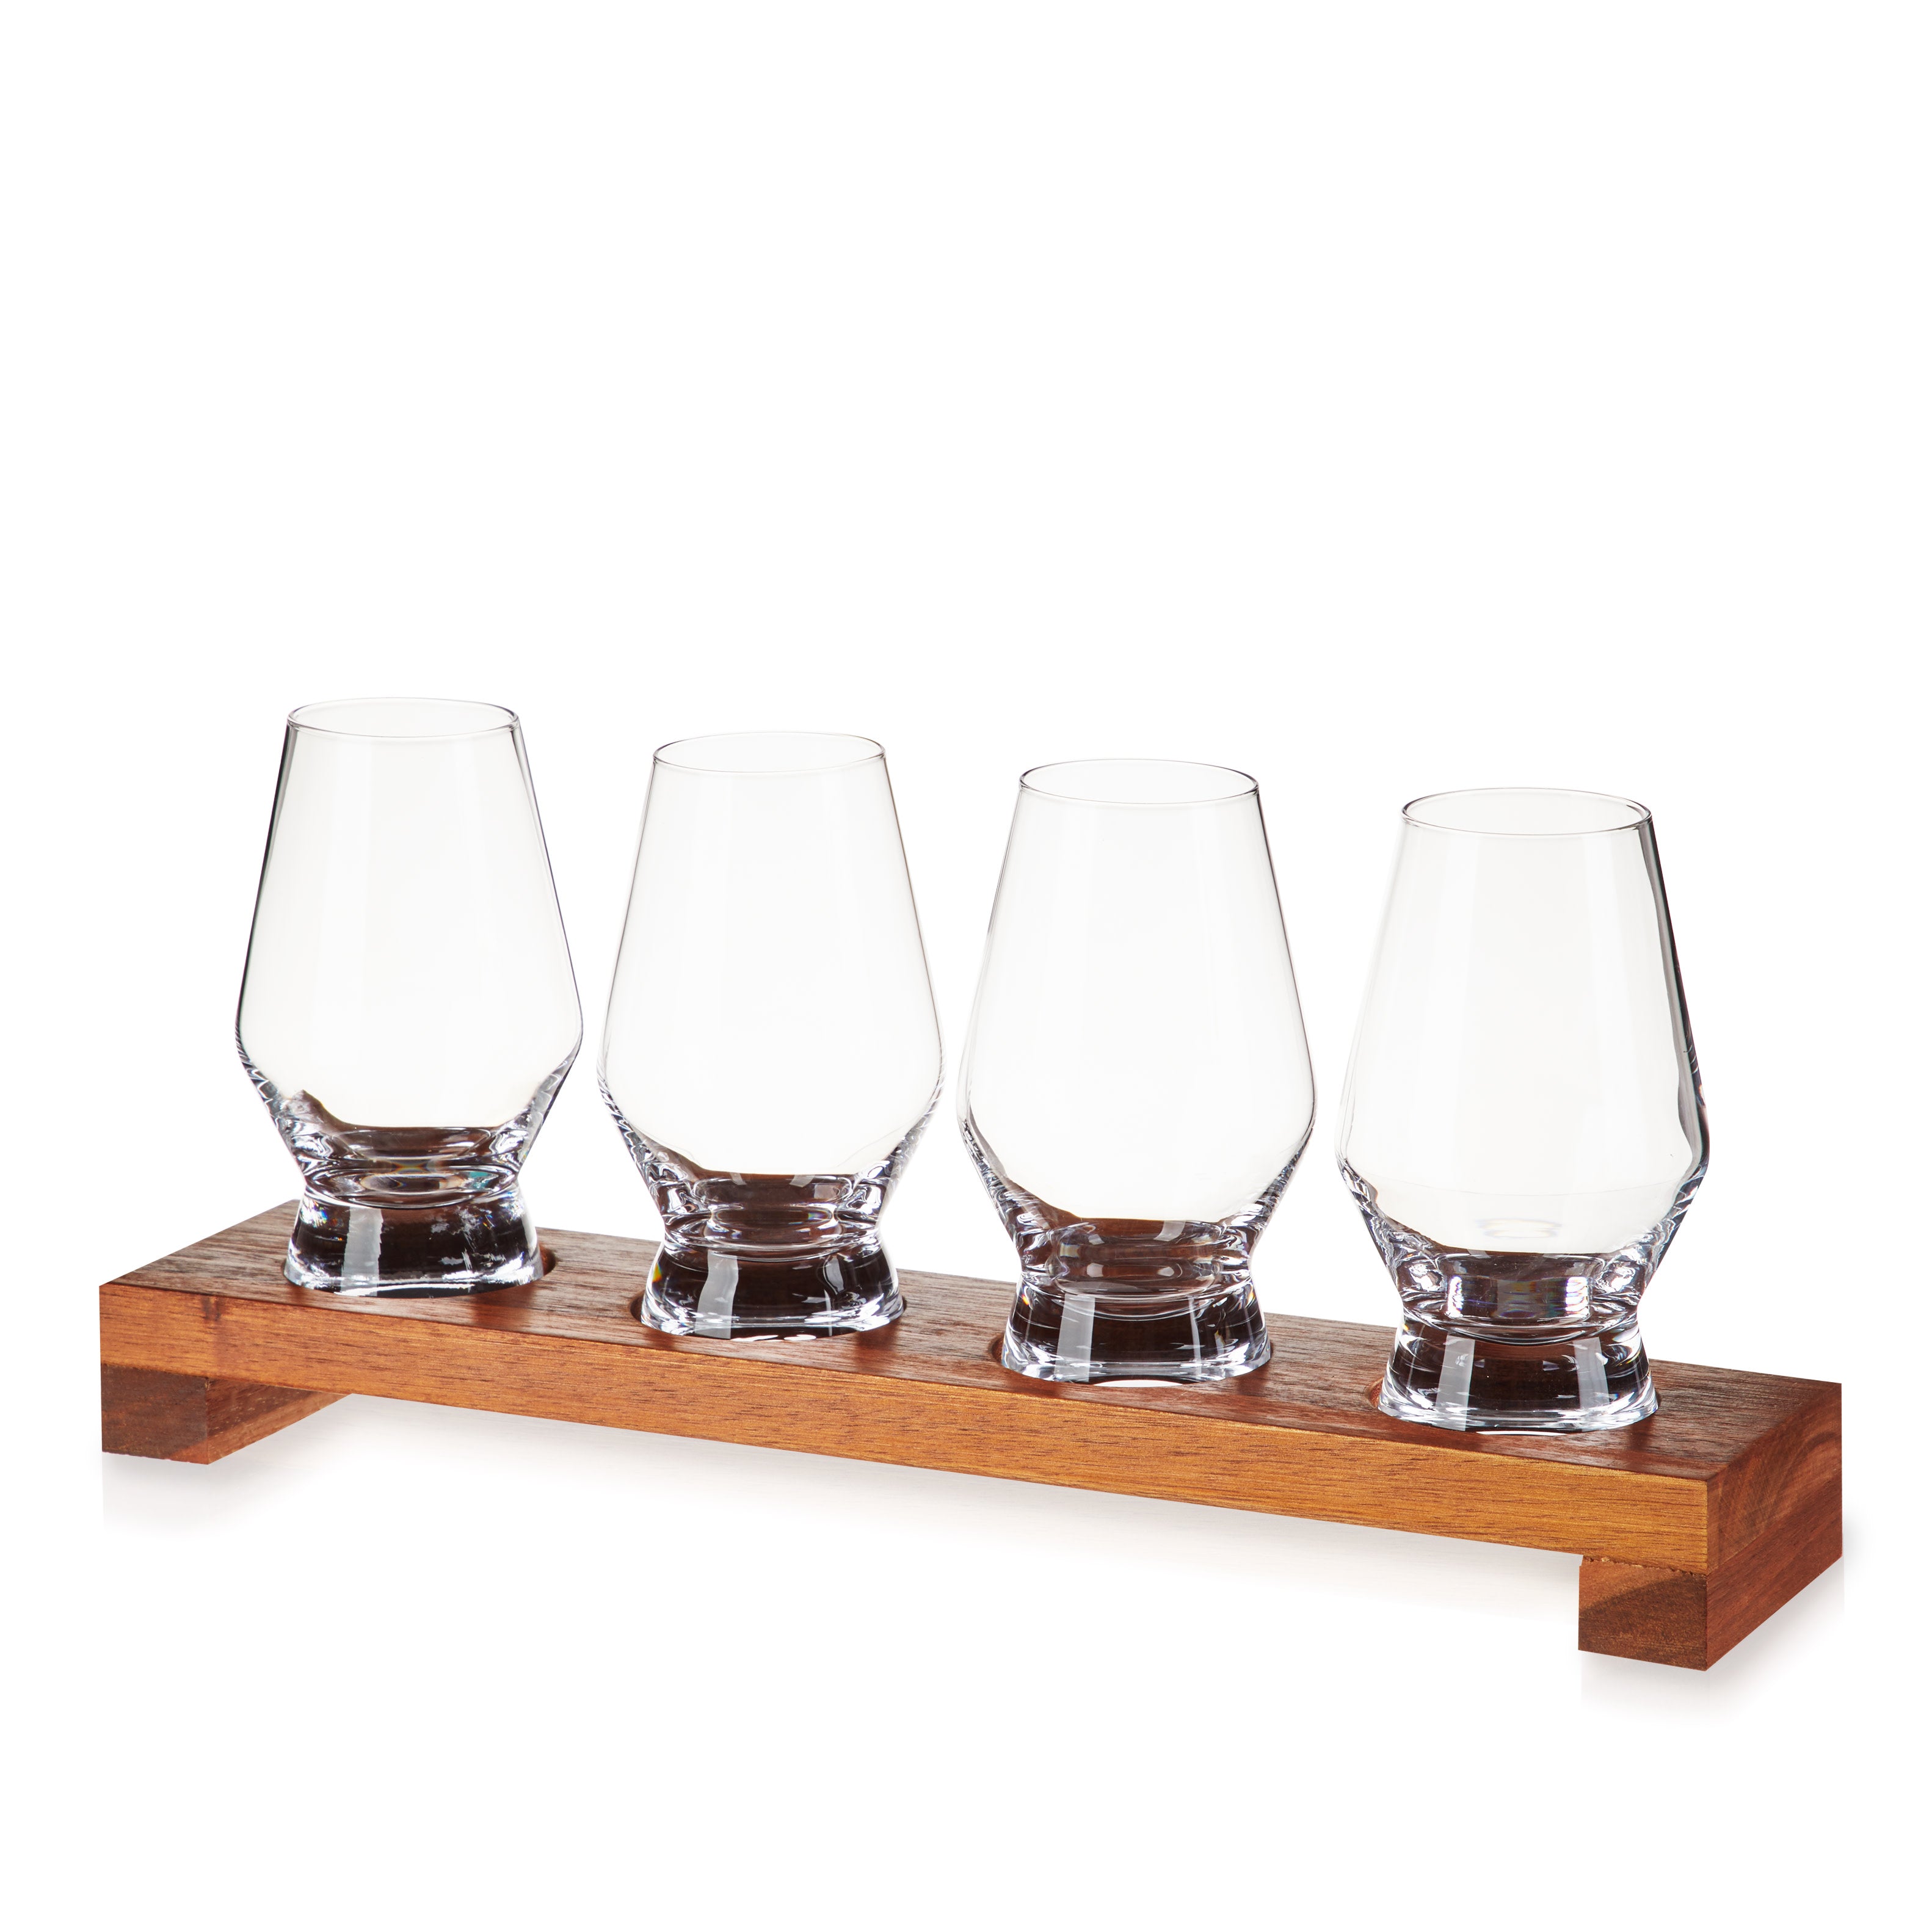 Whiskey Glasses Set of 6 with Serving Tray | Wooden Tray with Whiskey  Crystal Glasses | Rustic Wood Whiskey Server | Bar Glass Holder | Whiskey  Glass